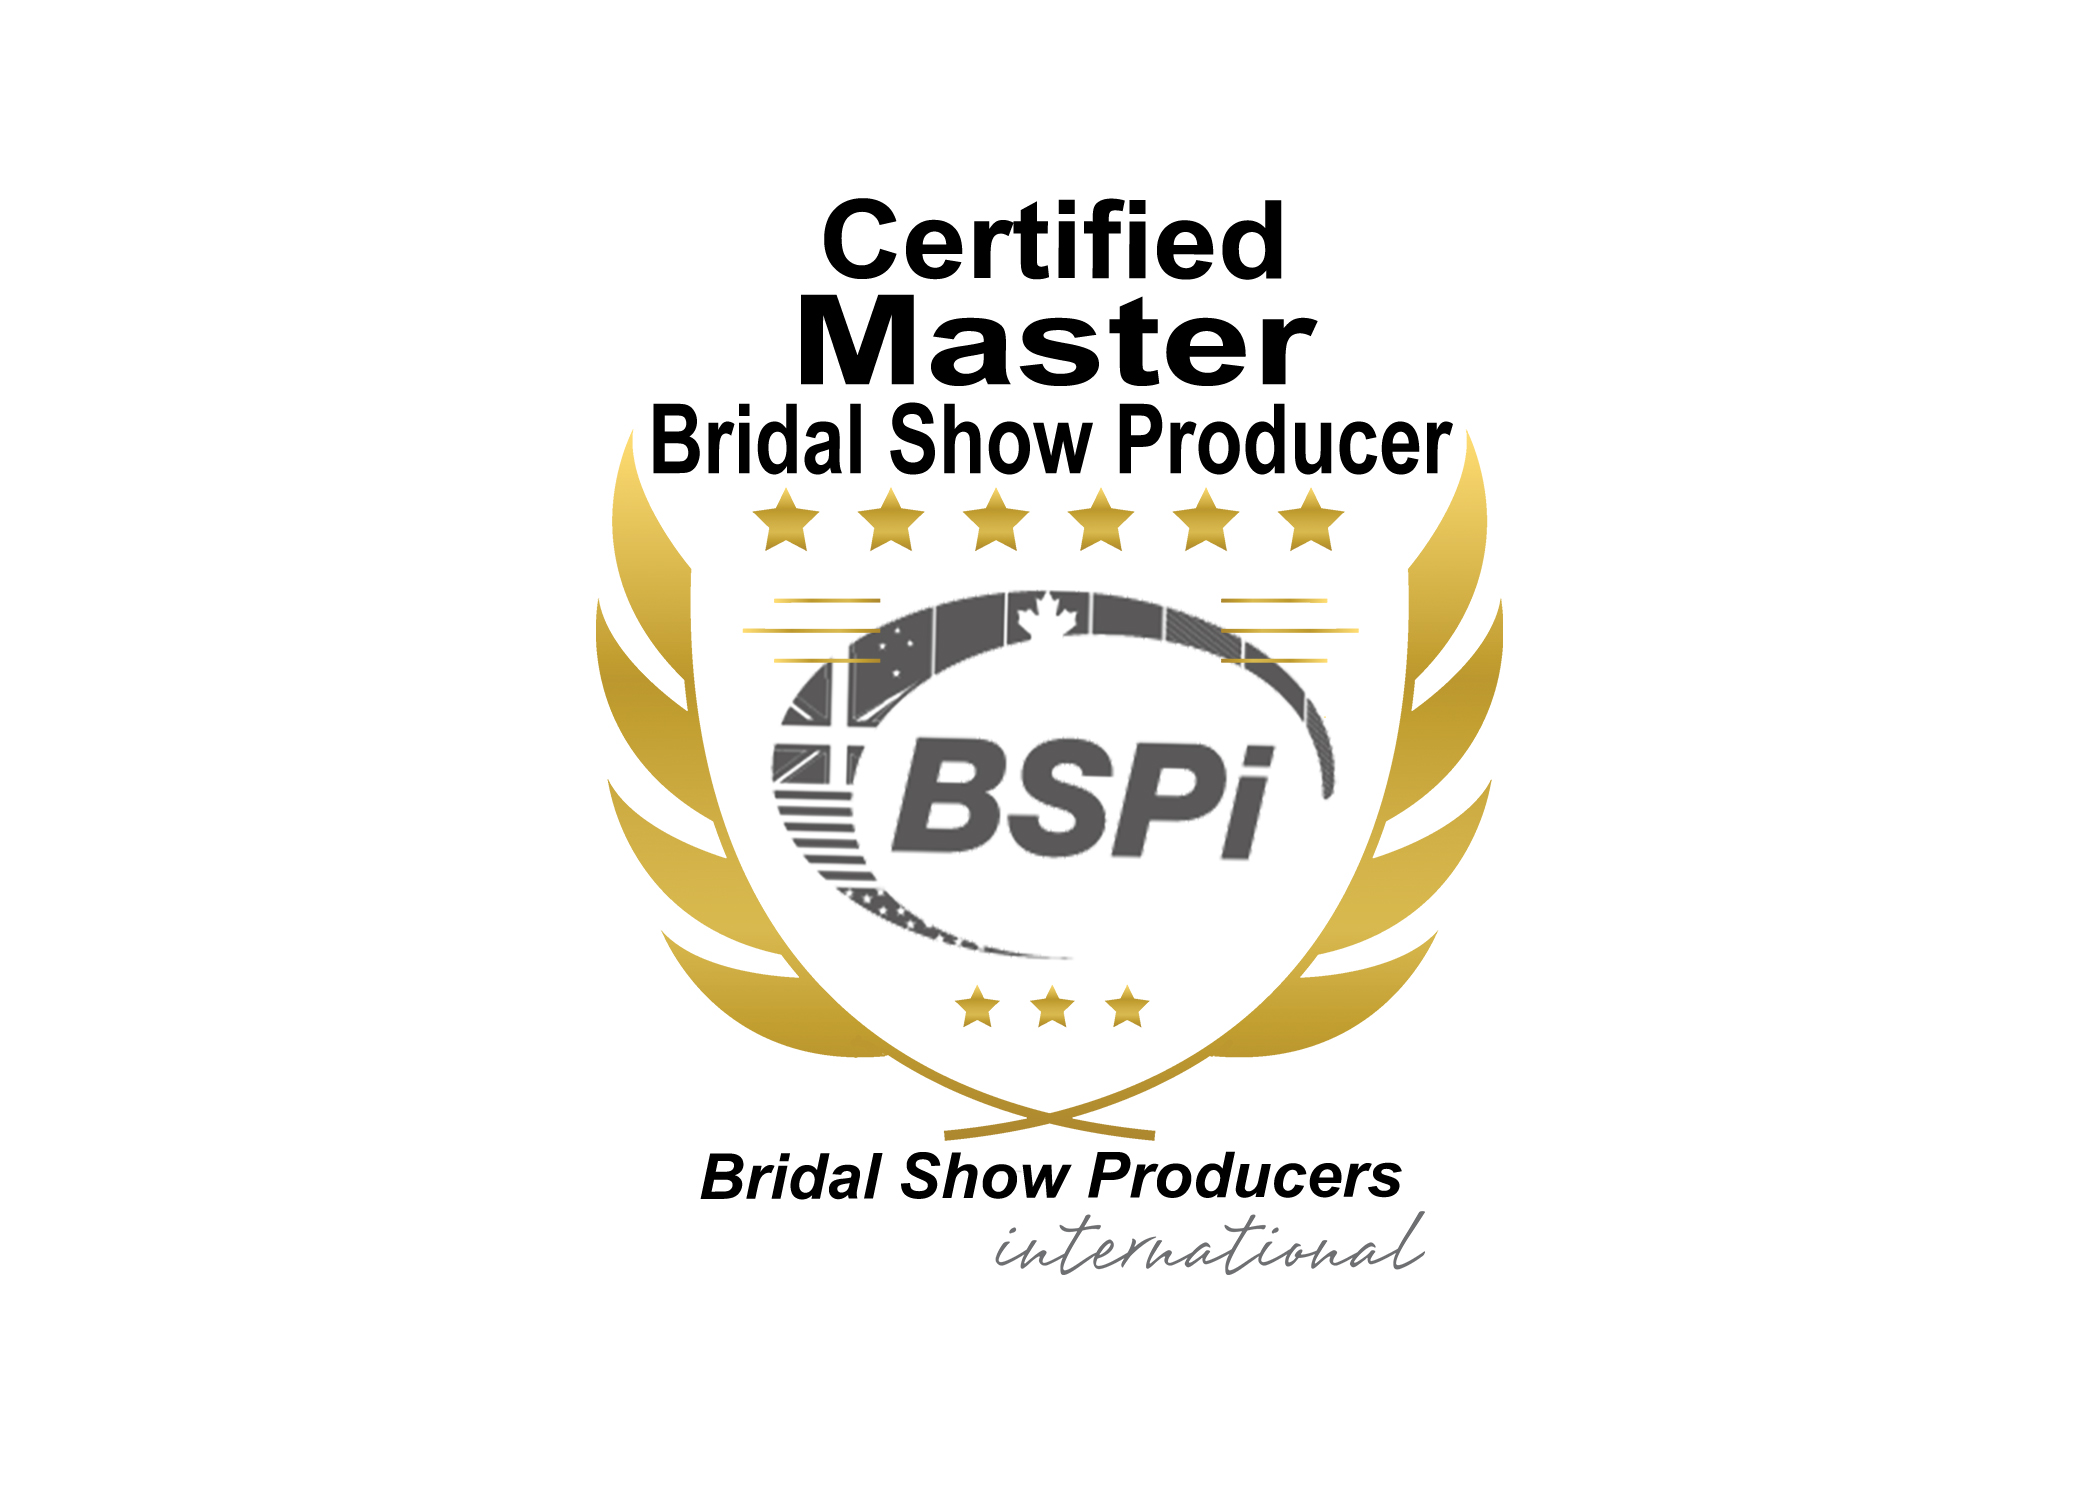 Bridal Show Producers International Certified Master